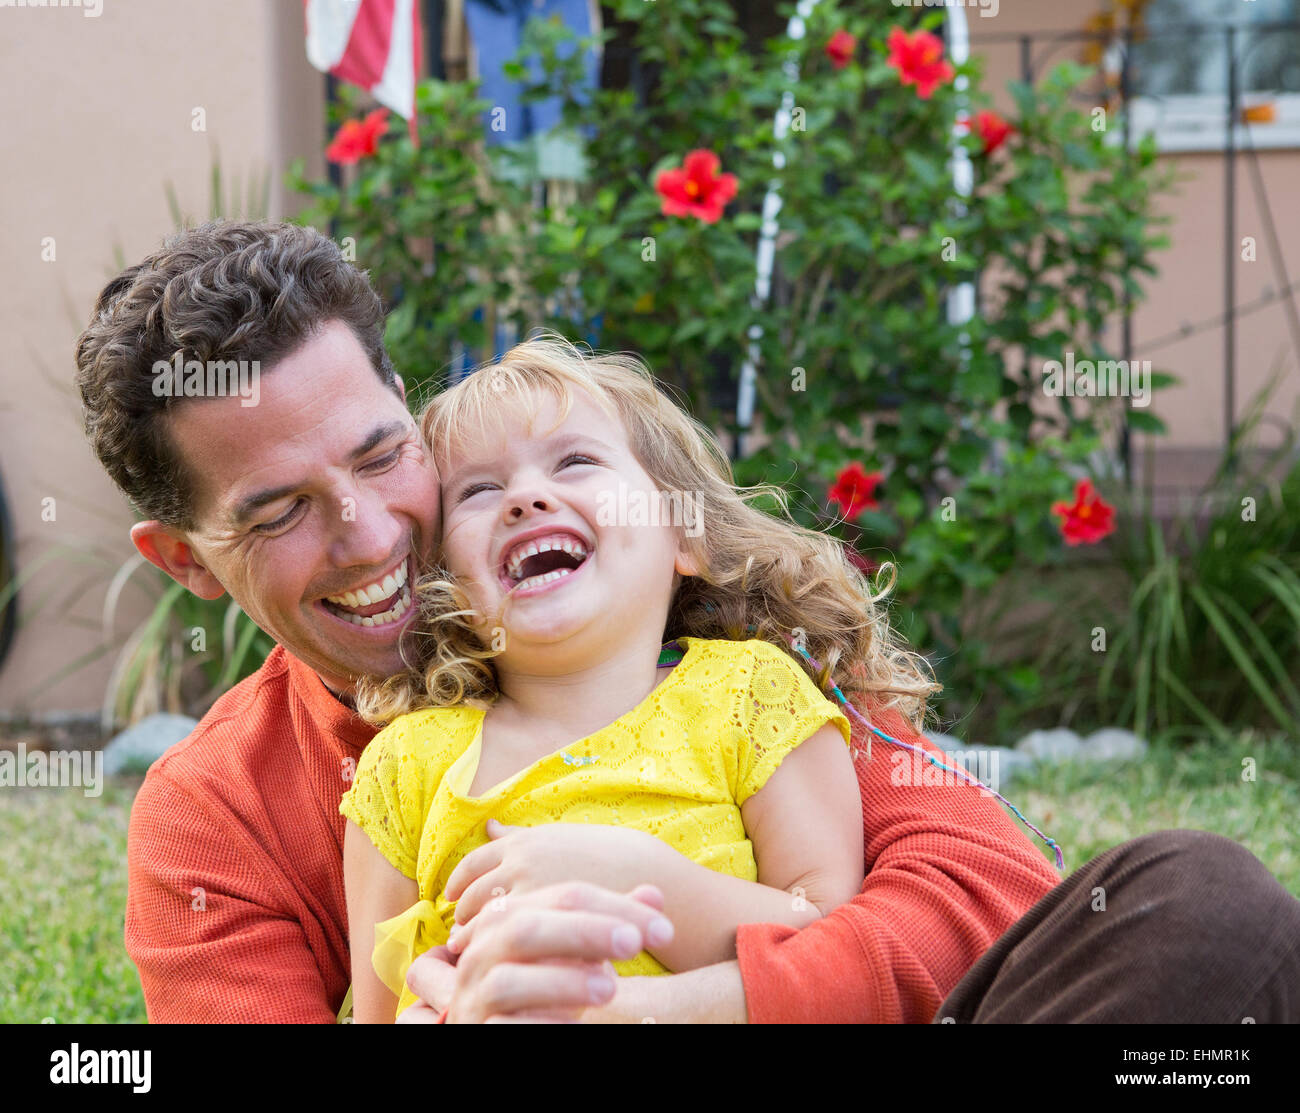 Caucasian father and daughter playing in backyard Banque D'Images